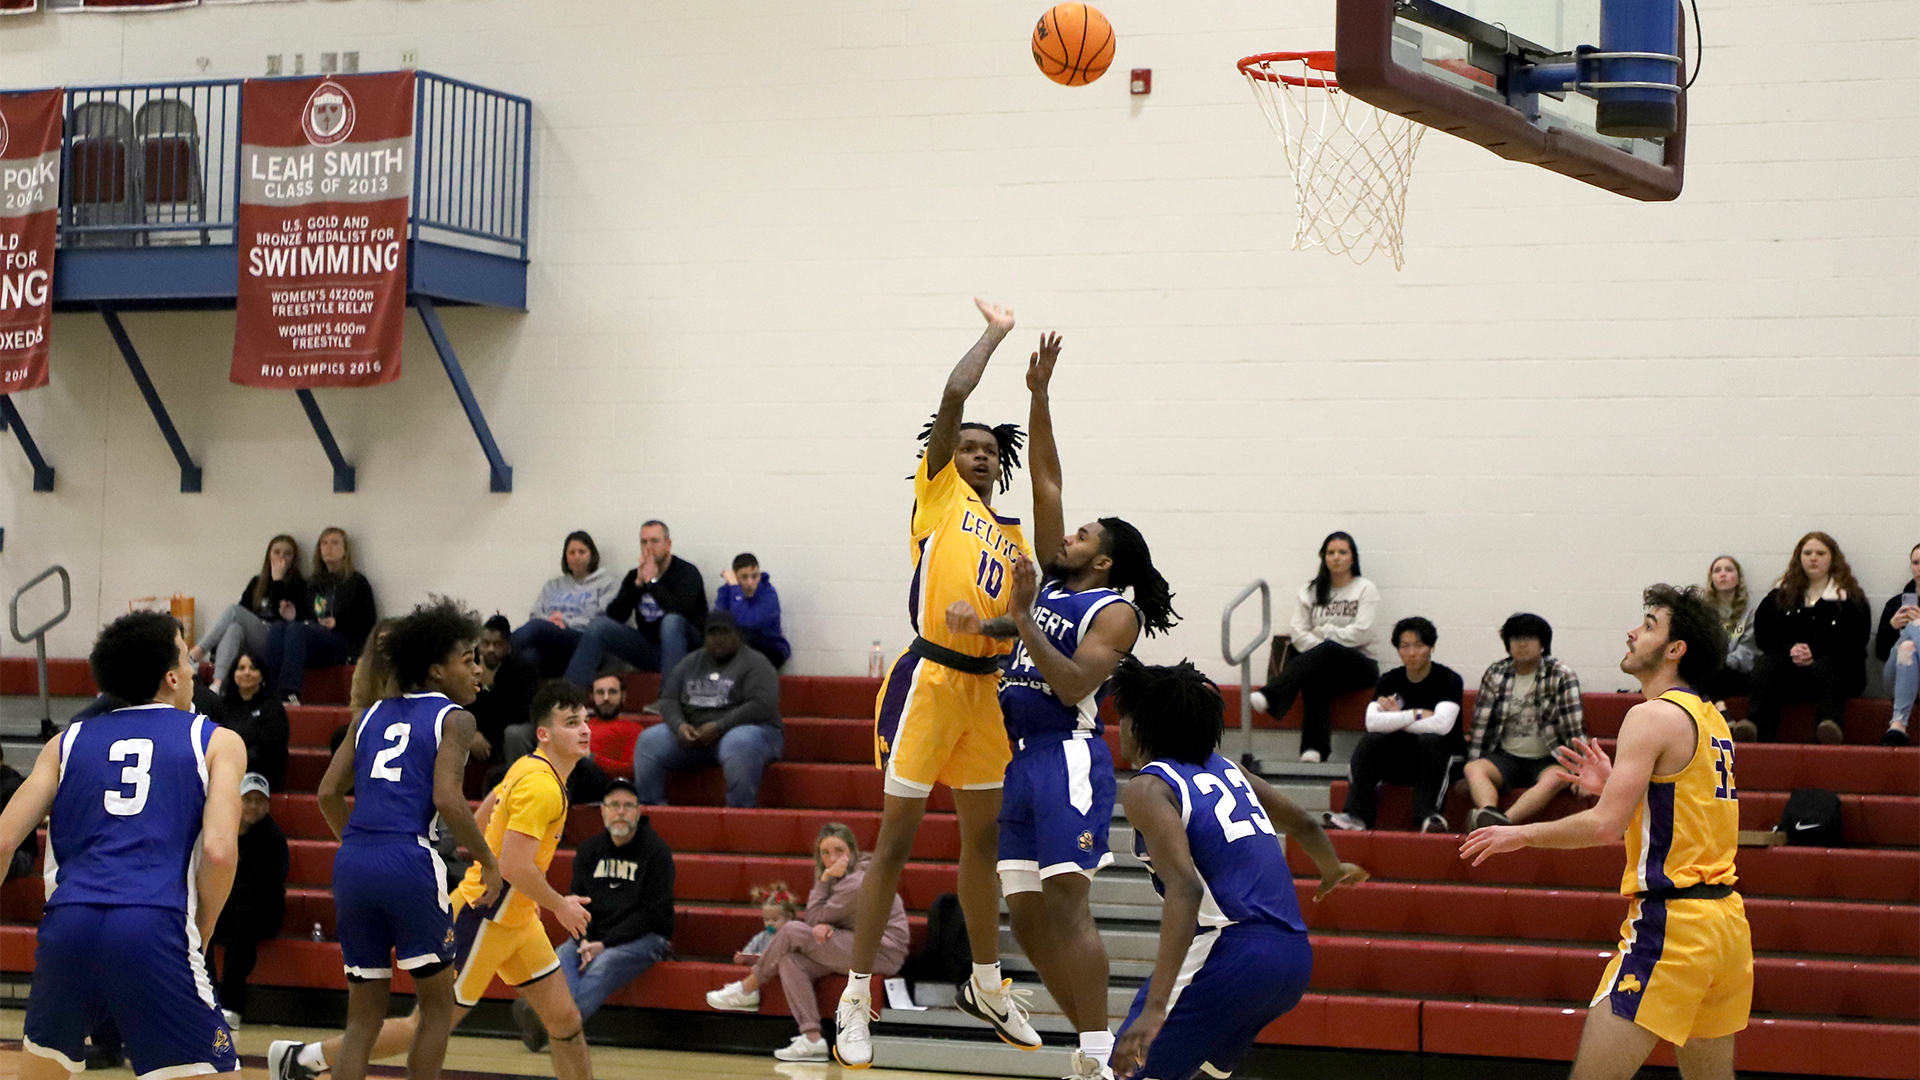 Galen Waters scored a season- and game-high 23 points. Photo by Robert Cifone.